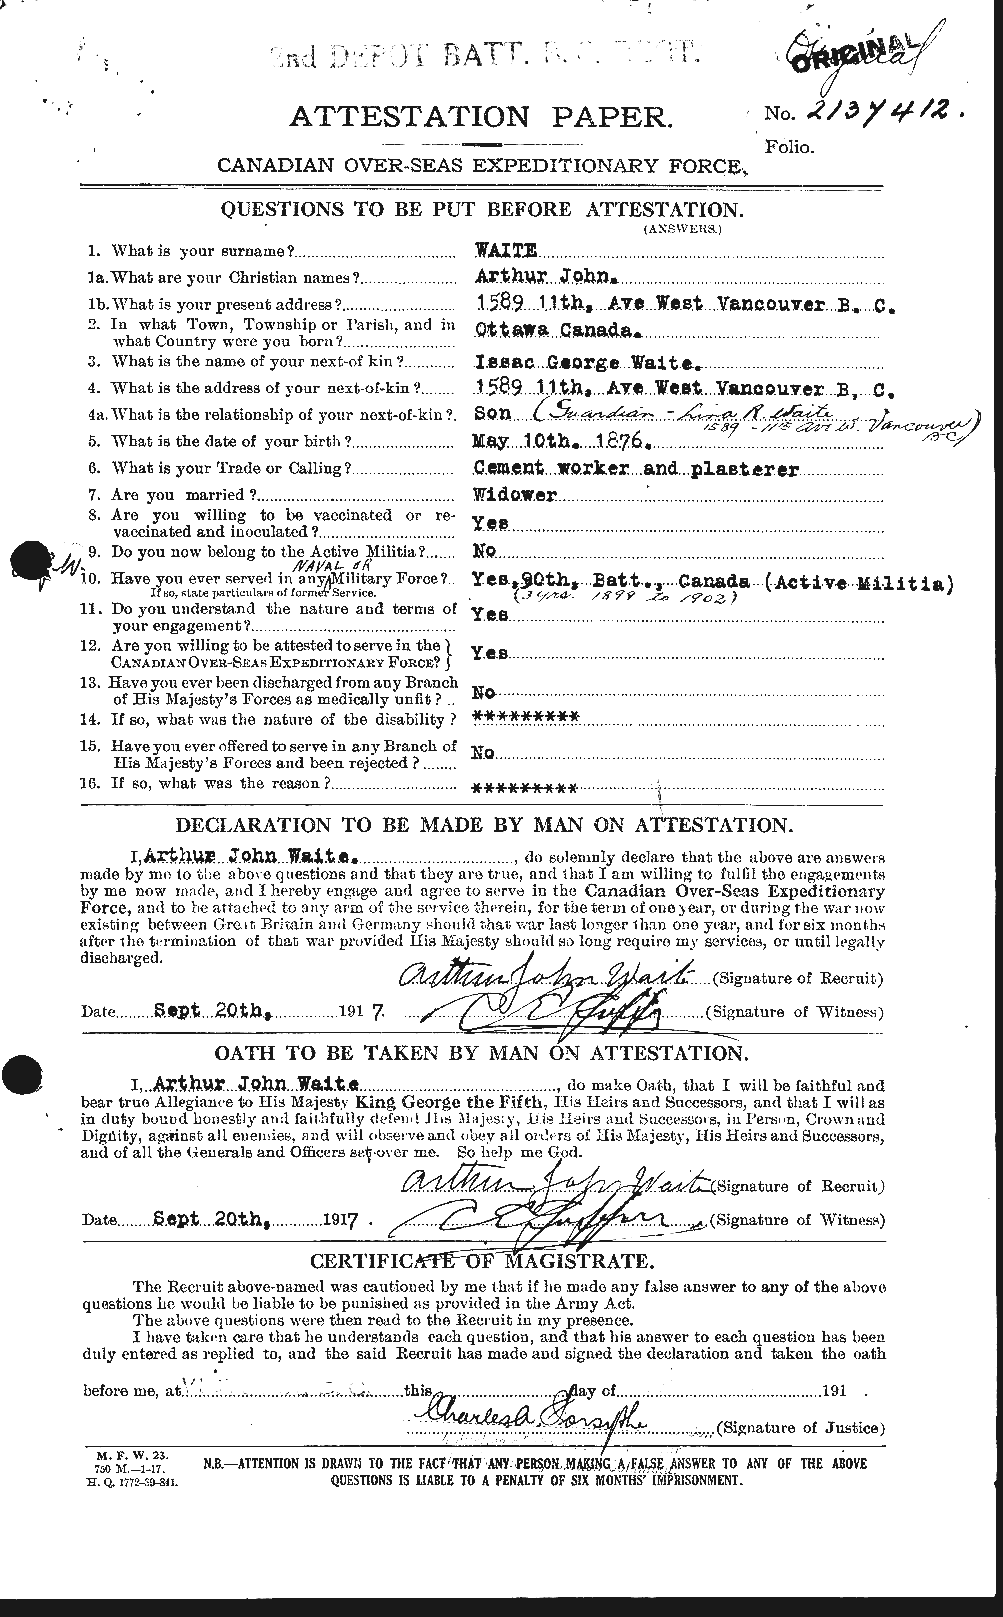 Personnel Records of the First World War - CEF 654224a